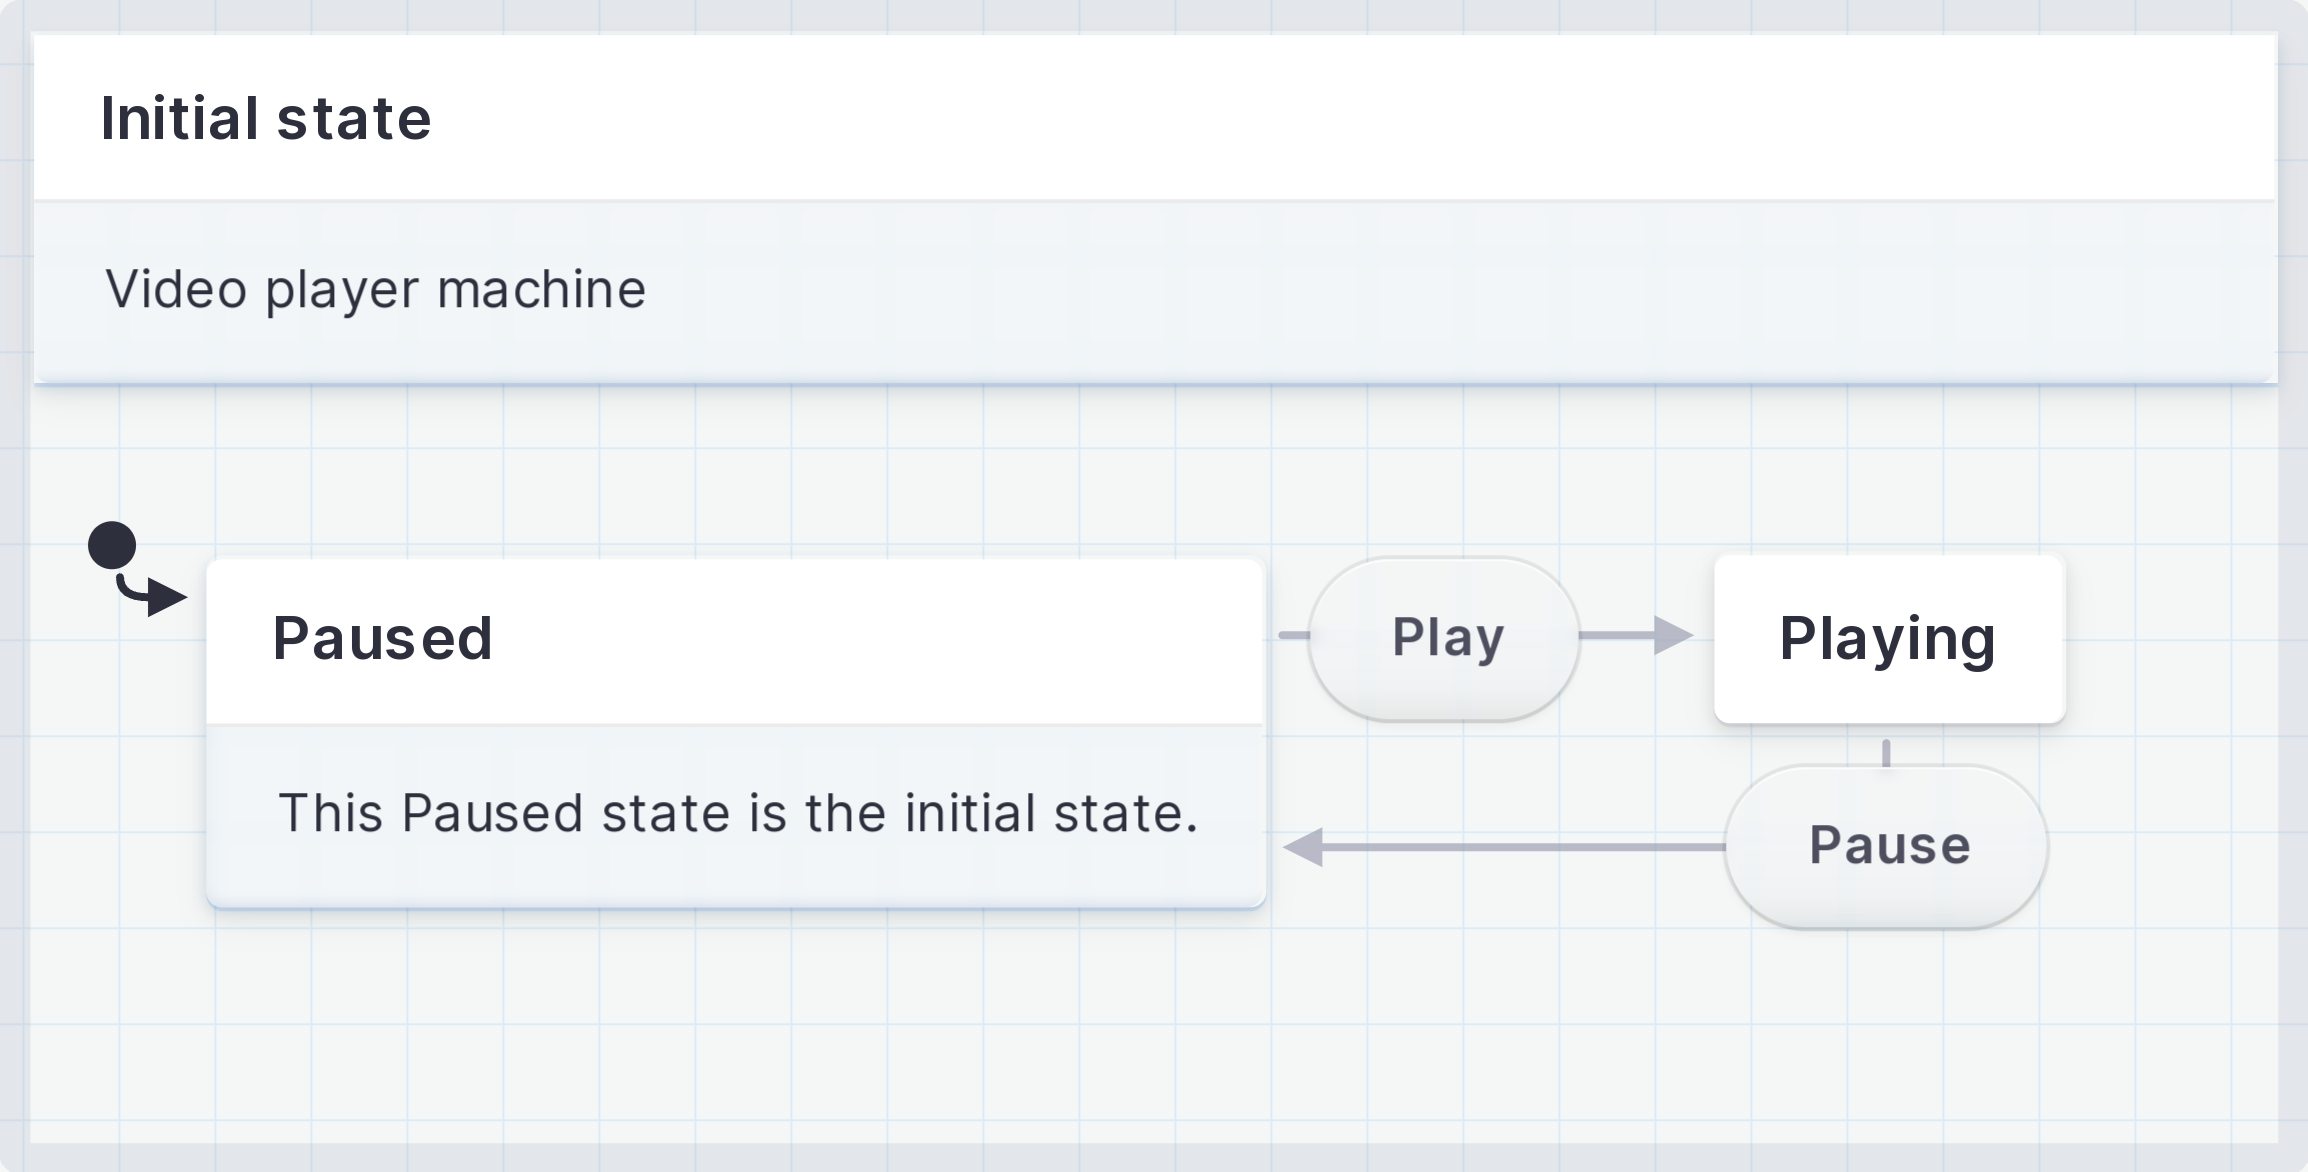 State machine with an initial state of Paused, transitioning through a Play event to the Playing state. From the Playing state back to the Paused state is a Pause event.